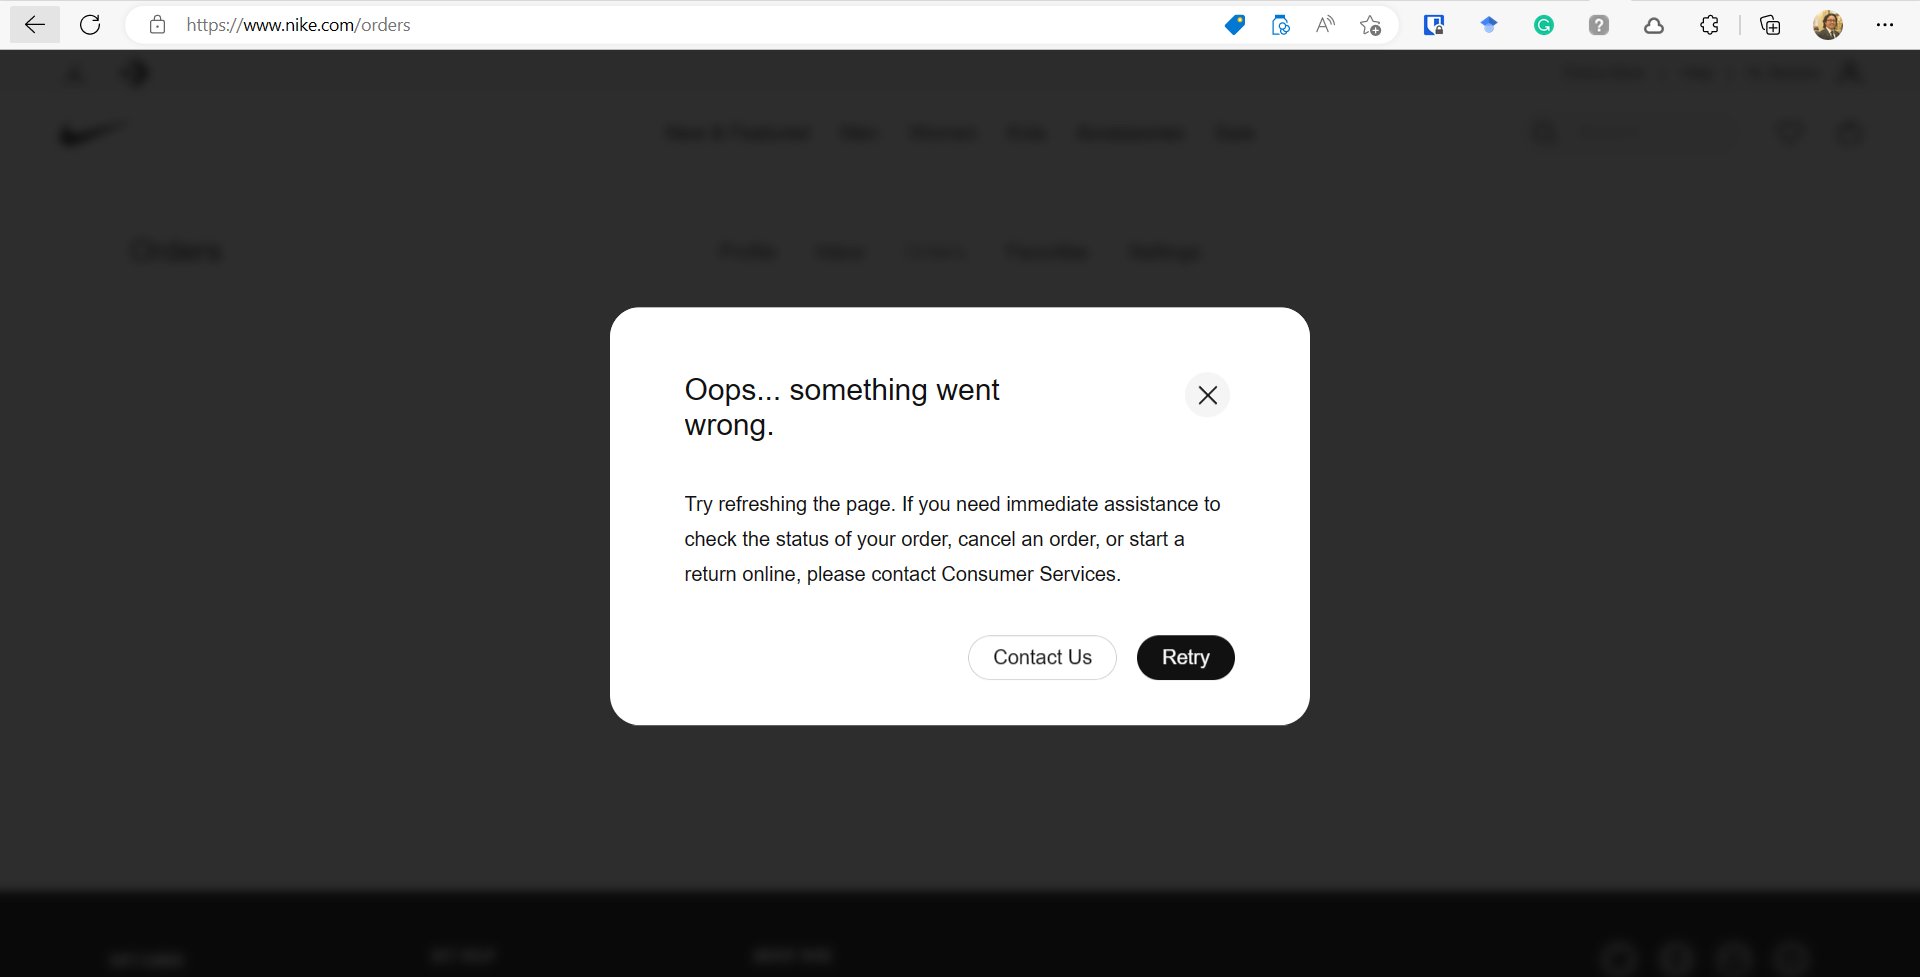 Benson on Twitter: "Dear @Nike: Fix your website. I can't do anything. All get are messages when navigating the site. The Contact Us button doesn't work. This has been